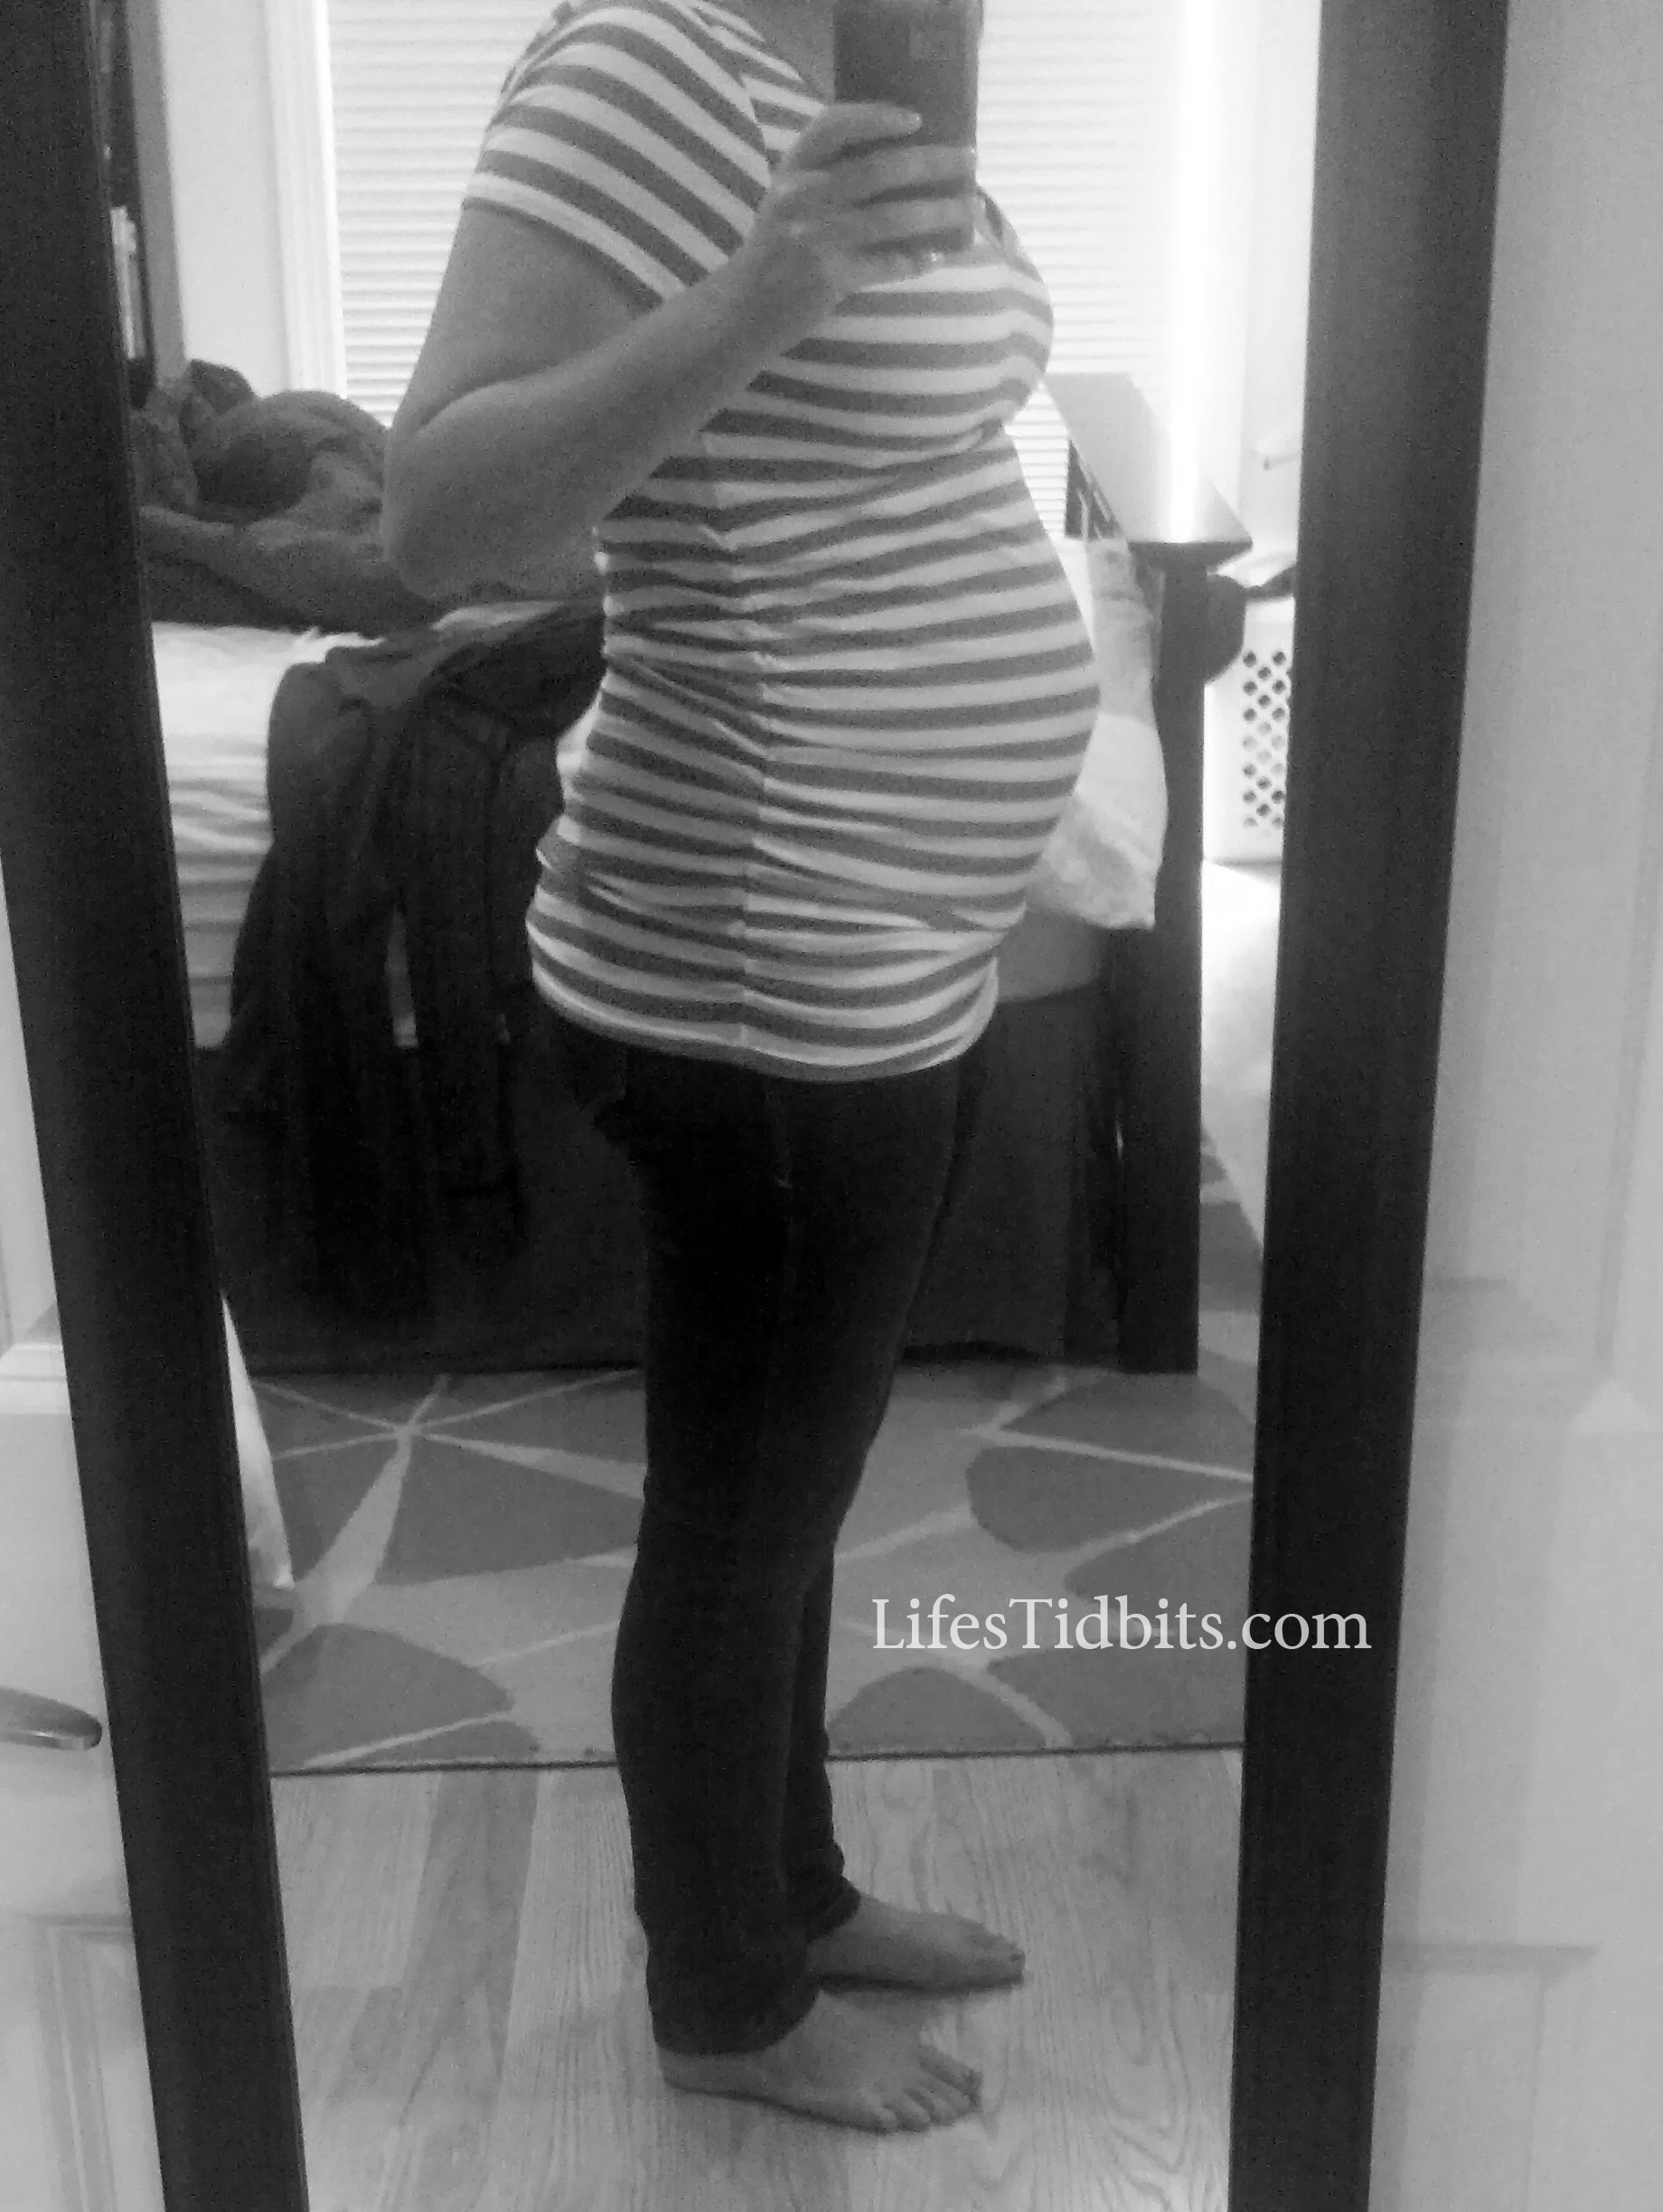 22 Weeks Pregnant, 5 Months | Life's Tidbits